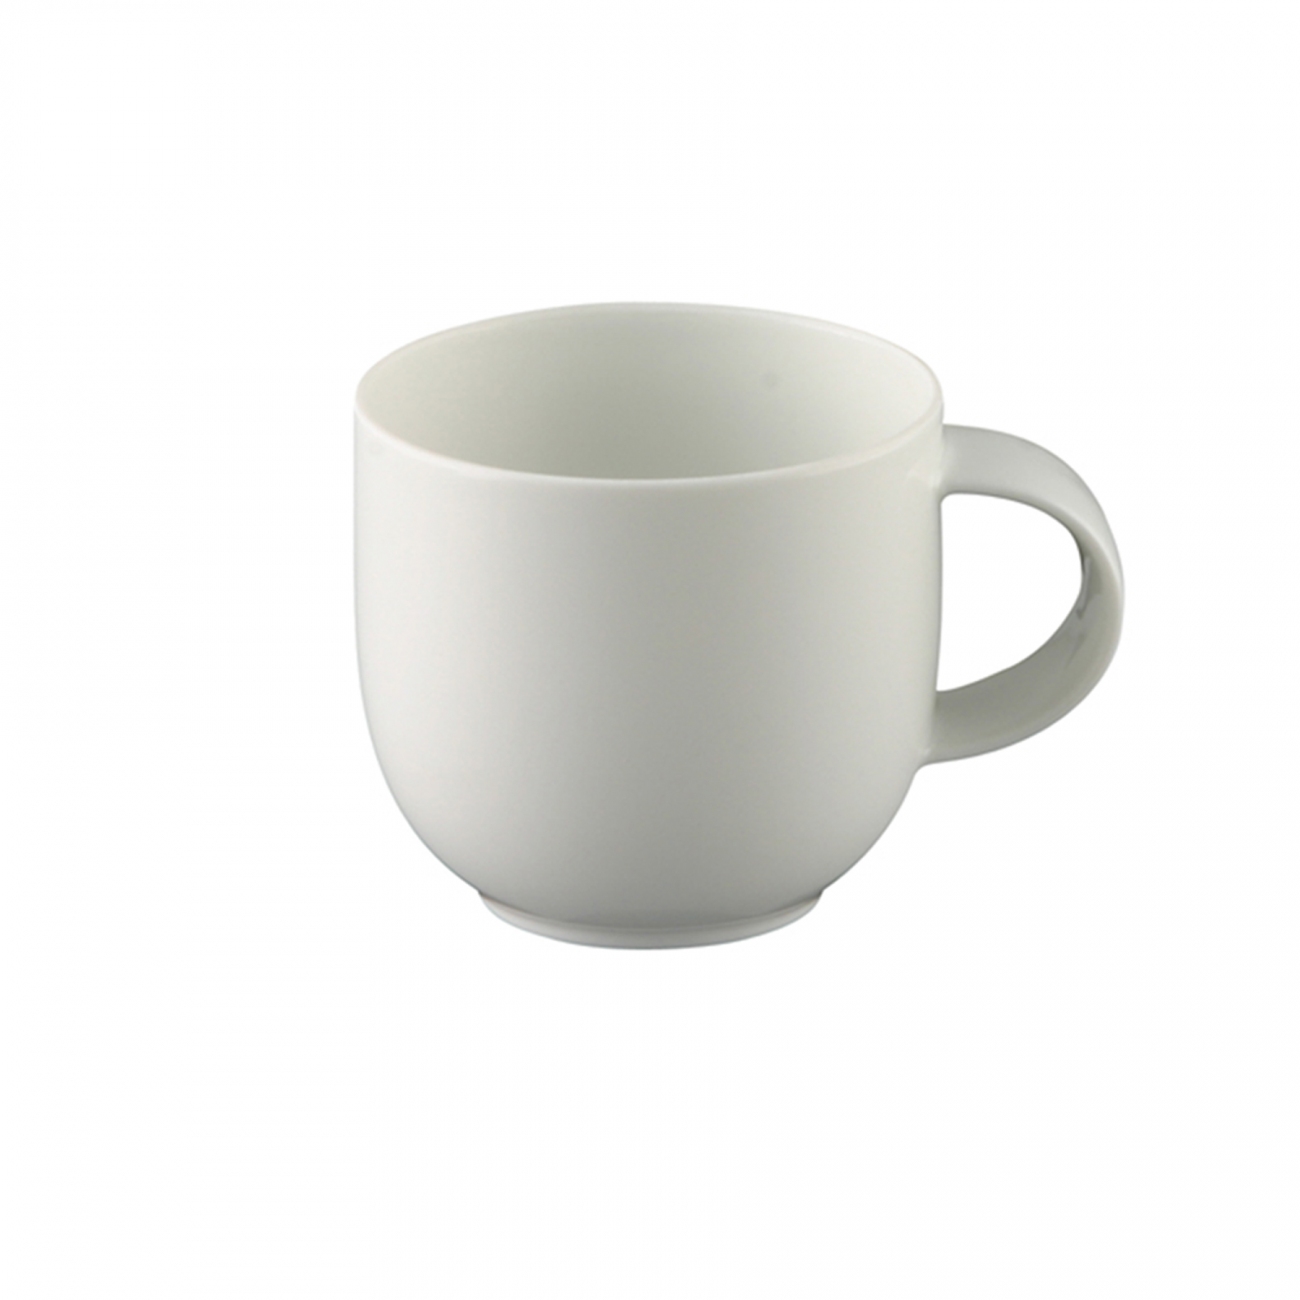 Rosenthal SUOMI Weiss Espresso Cup without Saucer